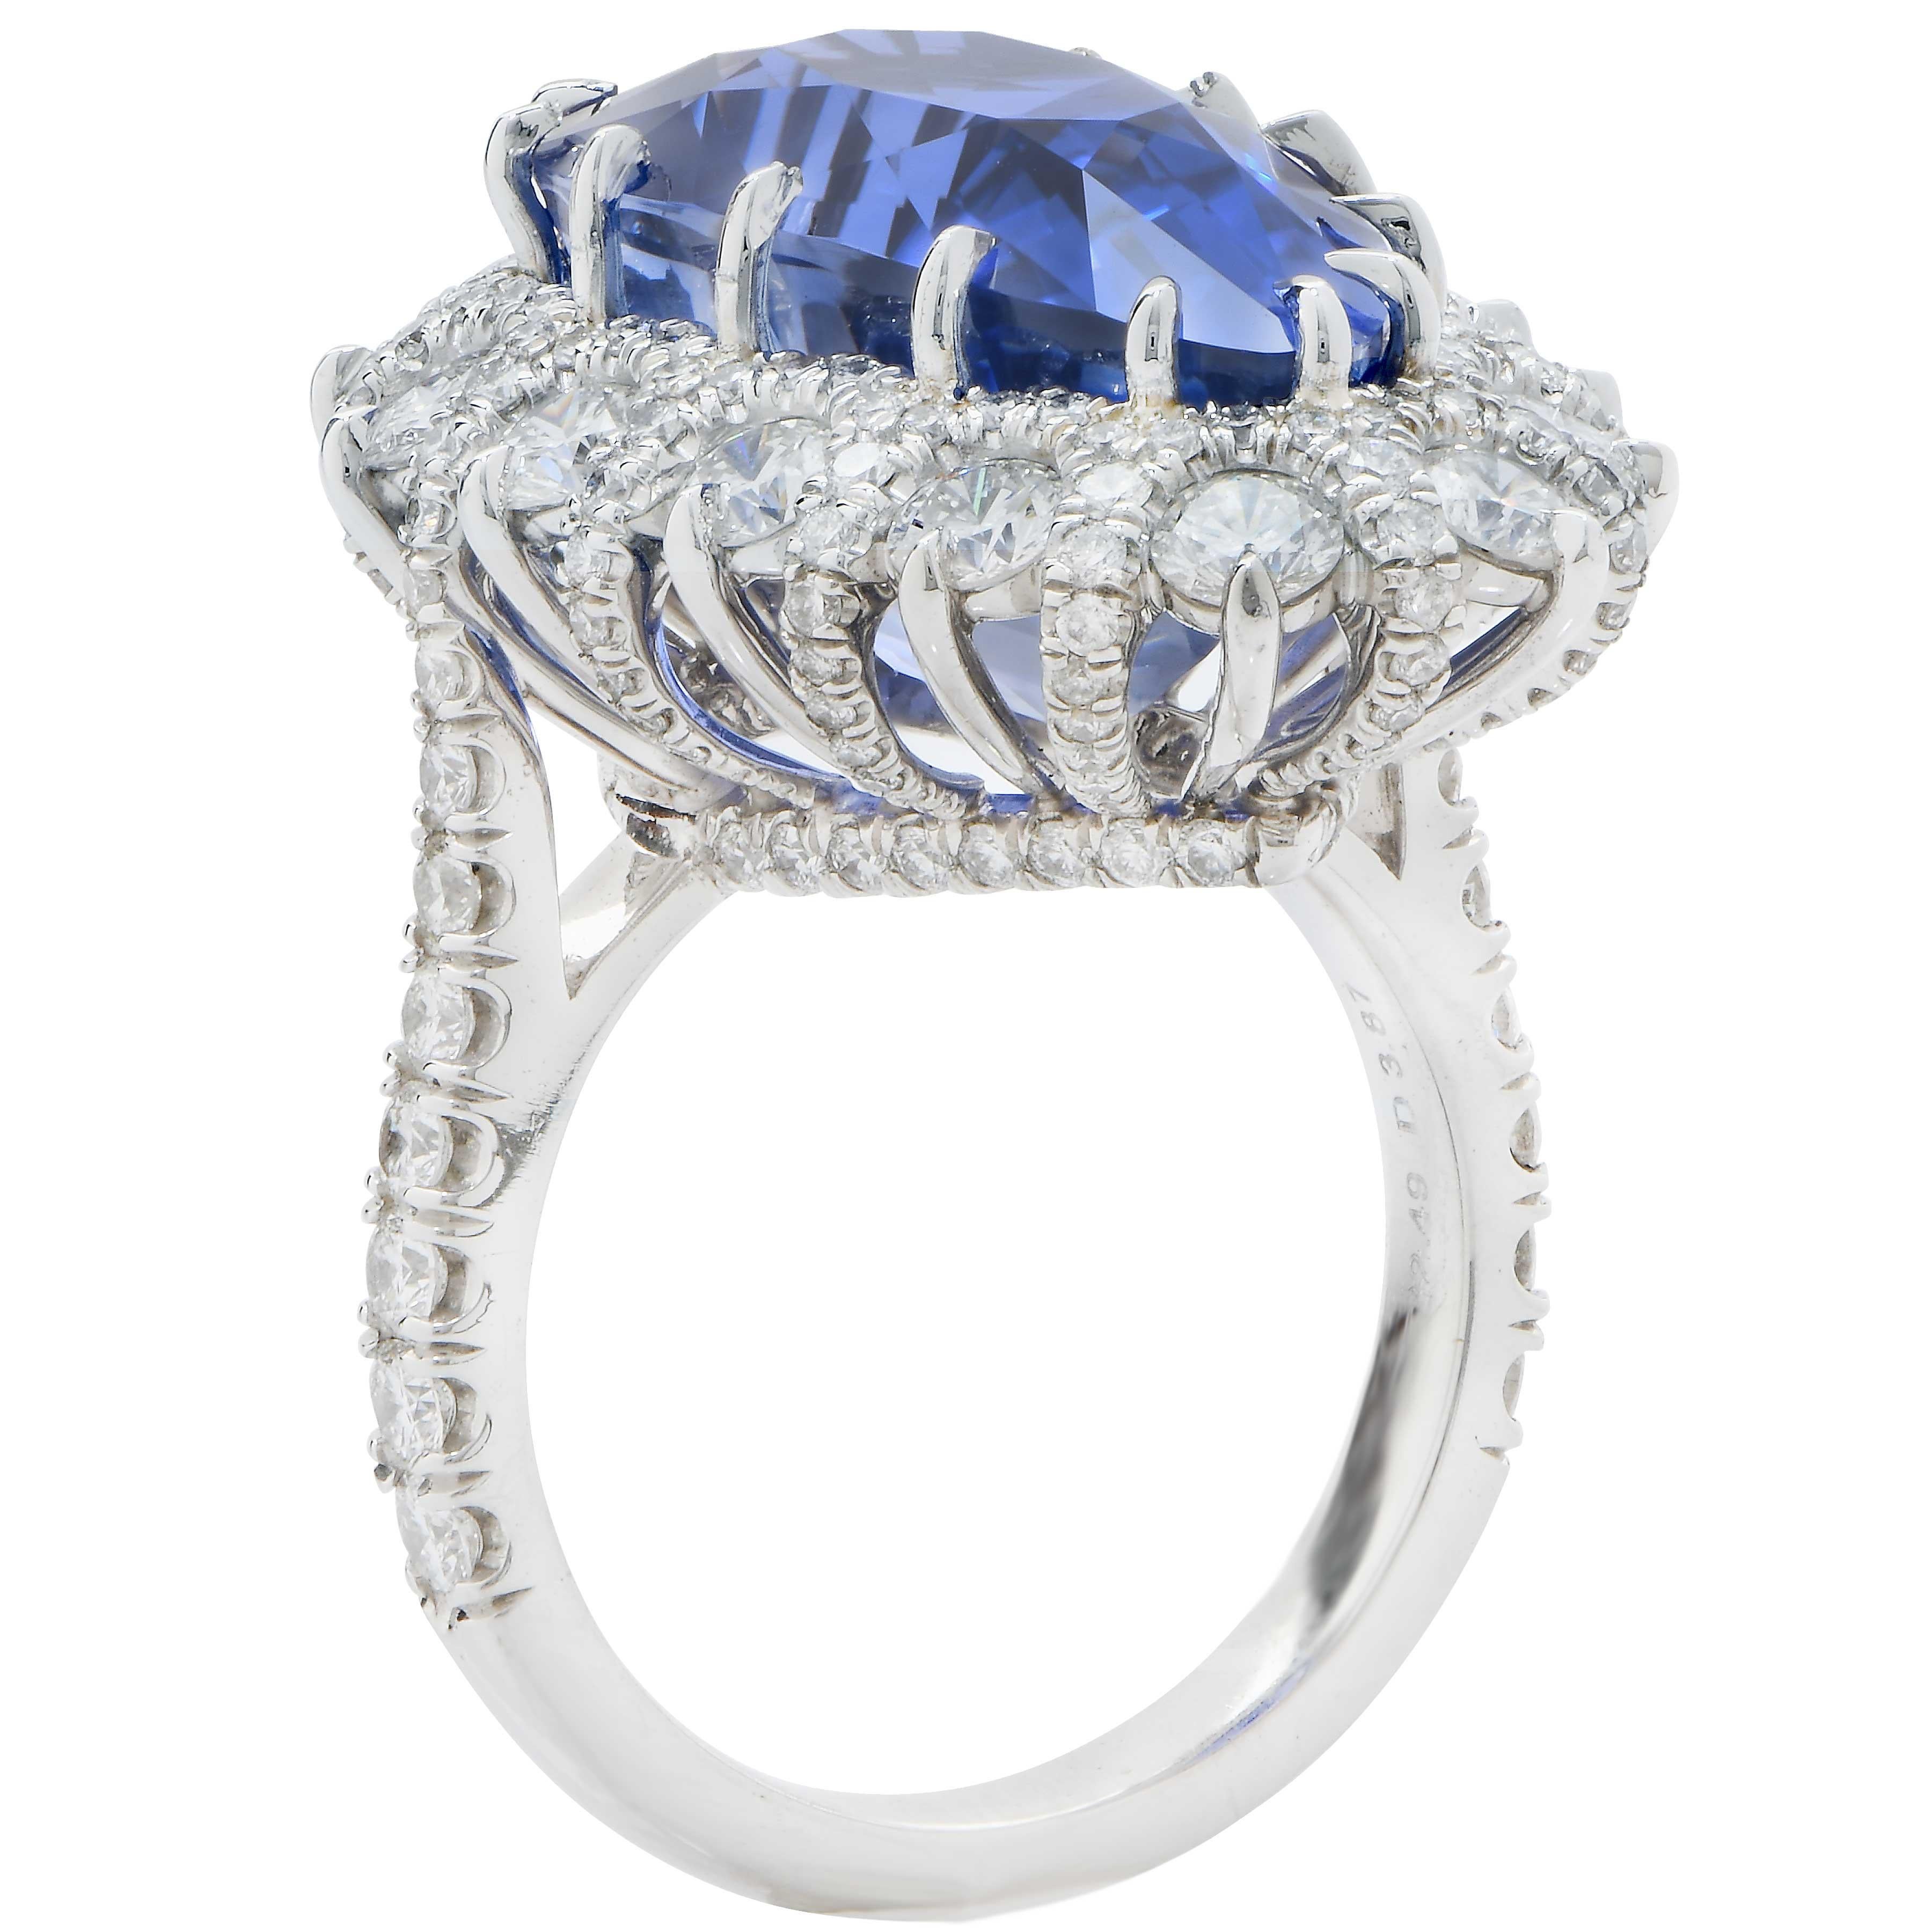 Important hand made platinum diamond ring features a 19 carat AGL Graded Ceylon No Heat pear shaped sapphire surrounded by 3.87 carats of round brilliant cut diamonds.
This one of a kind hand made ring is size six and one half. It can be sized